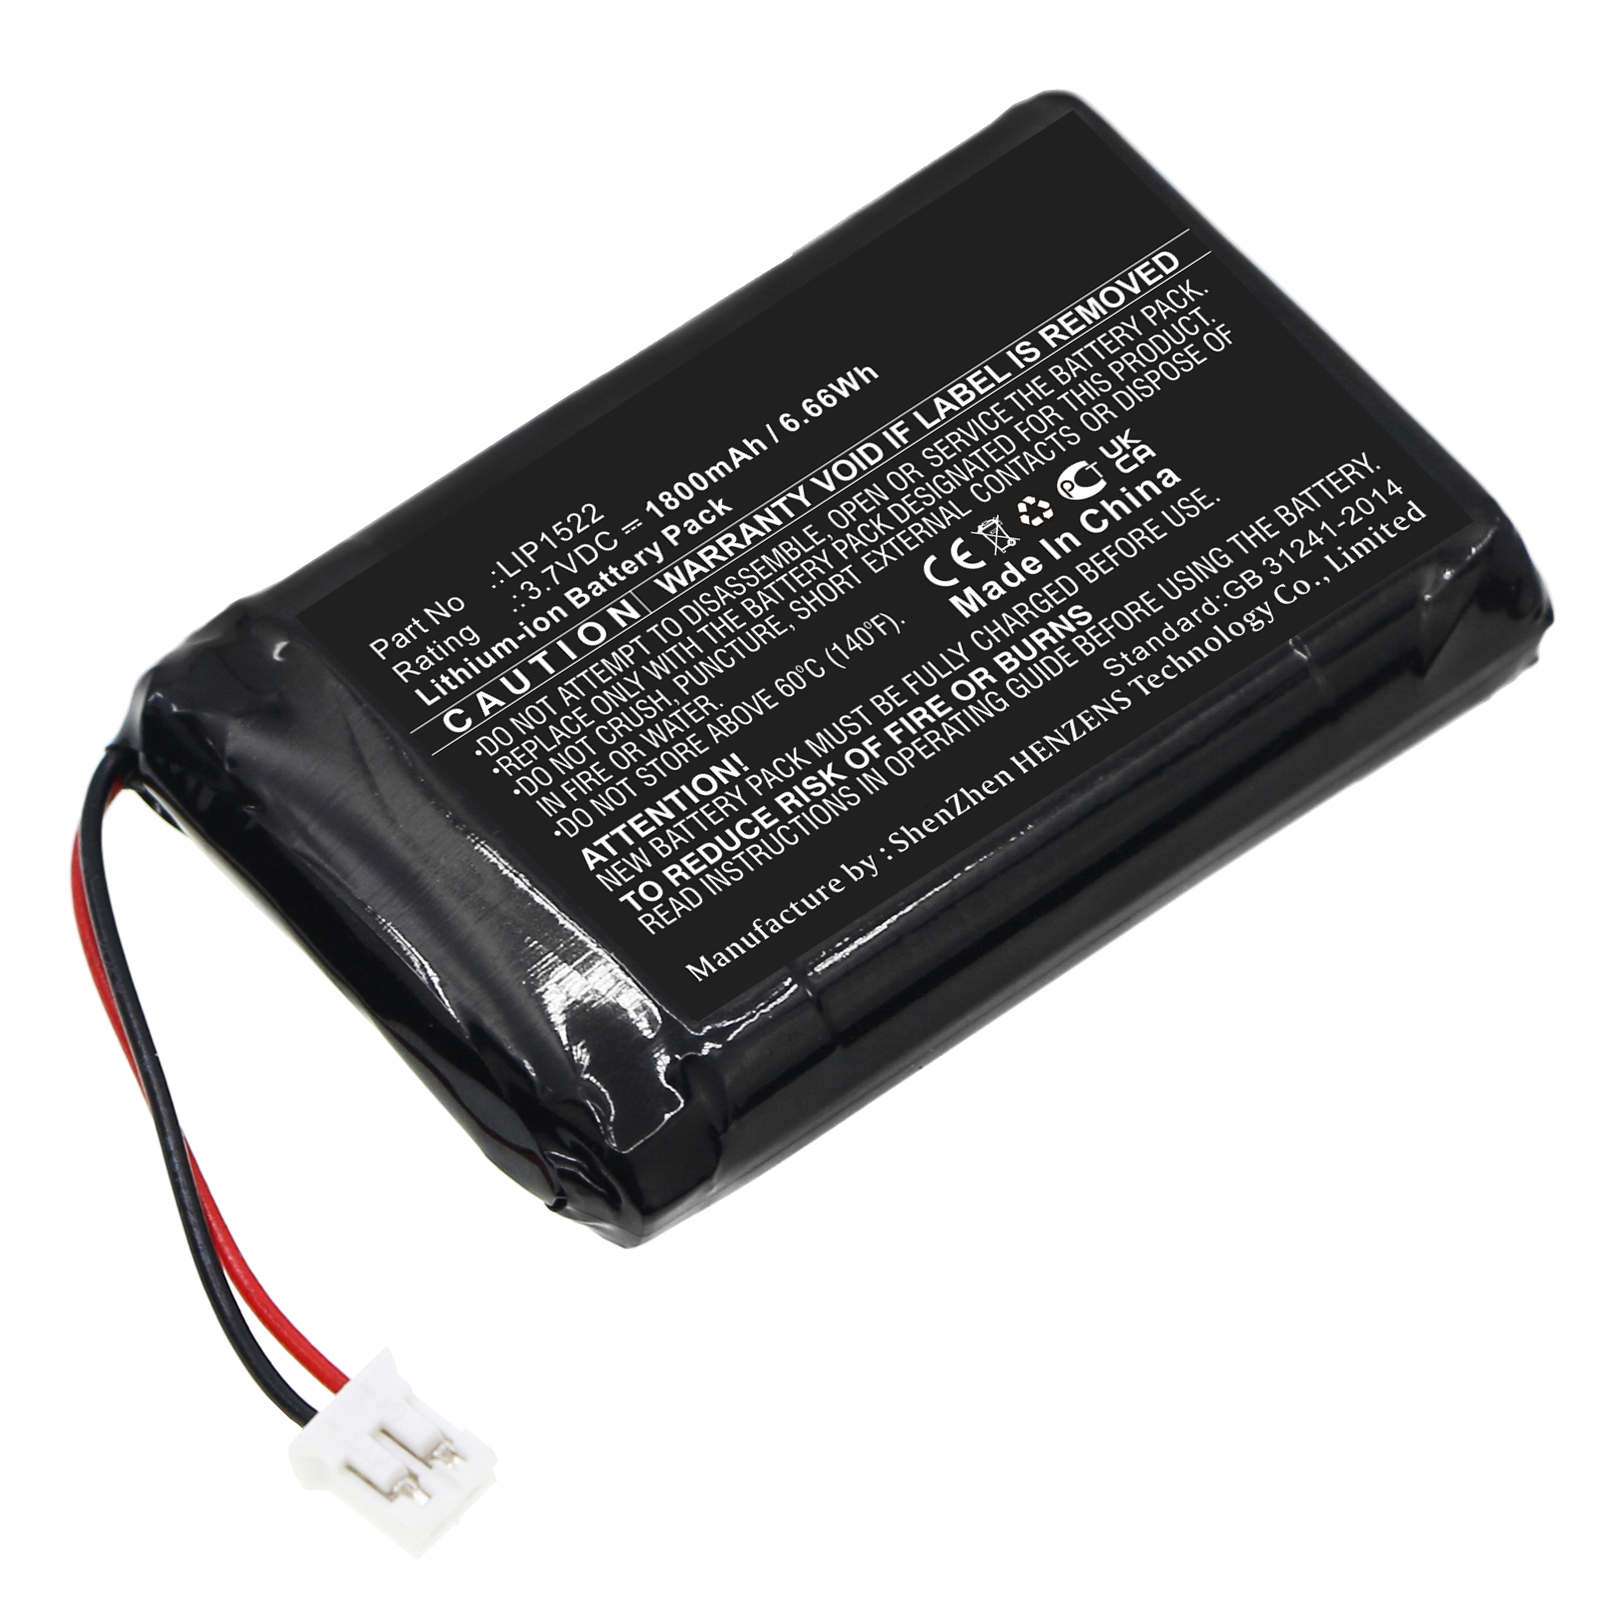 Synergy Digital Game Console Battery, Compatible with Sony LIP1522 Game Console Battery (Li-ion, 3.7V, 1800mAh)